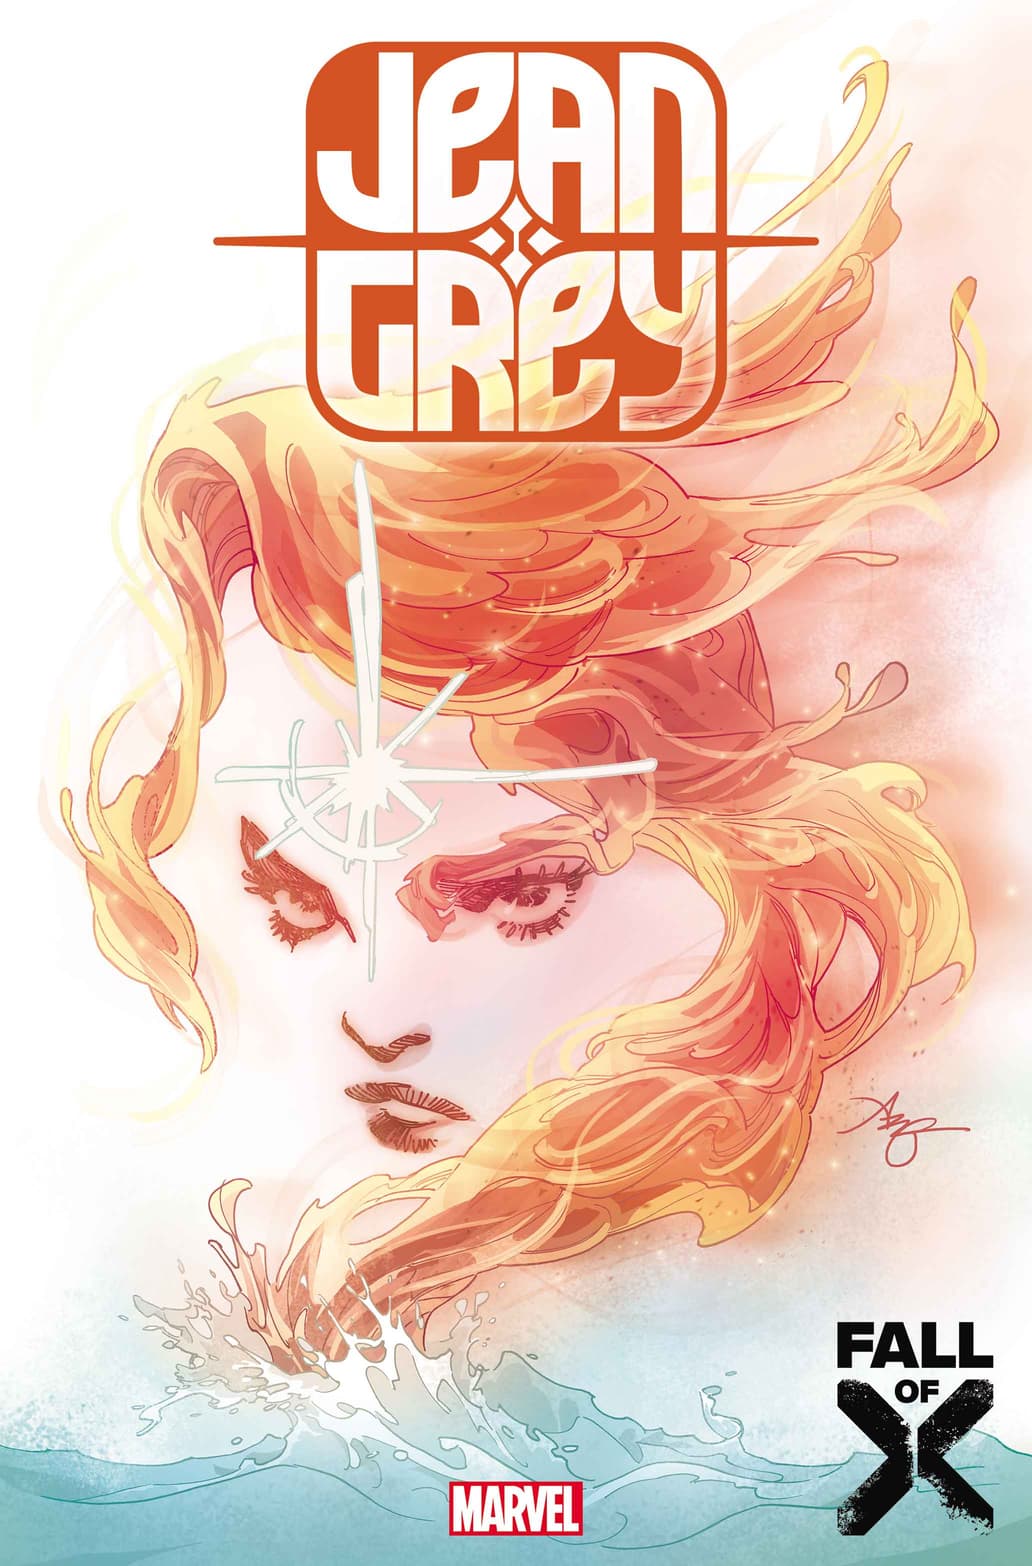 JEAN GREY #1 cover by Amy Reeder